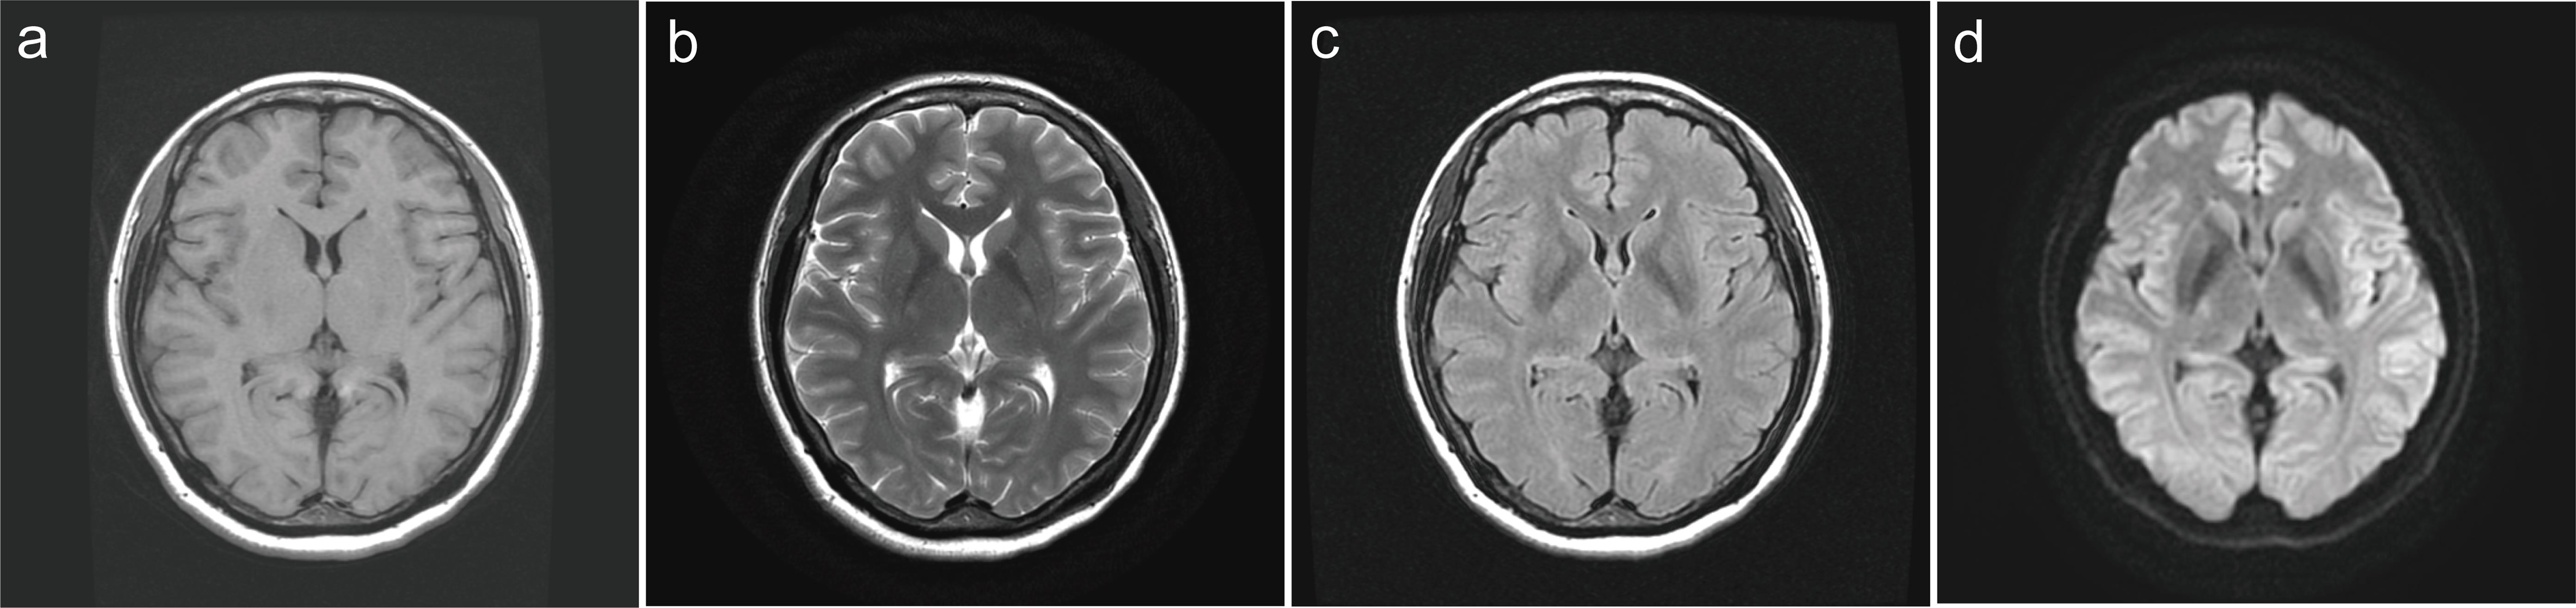 Cranial magnetic resonance routine scan images.